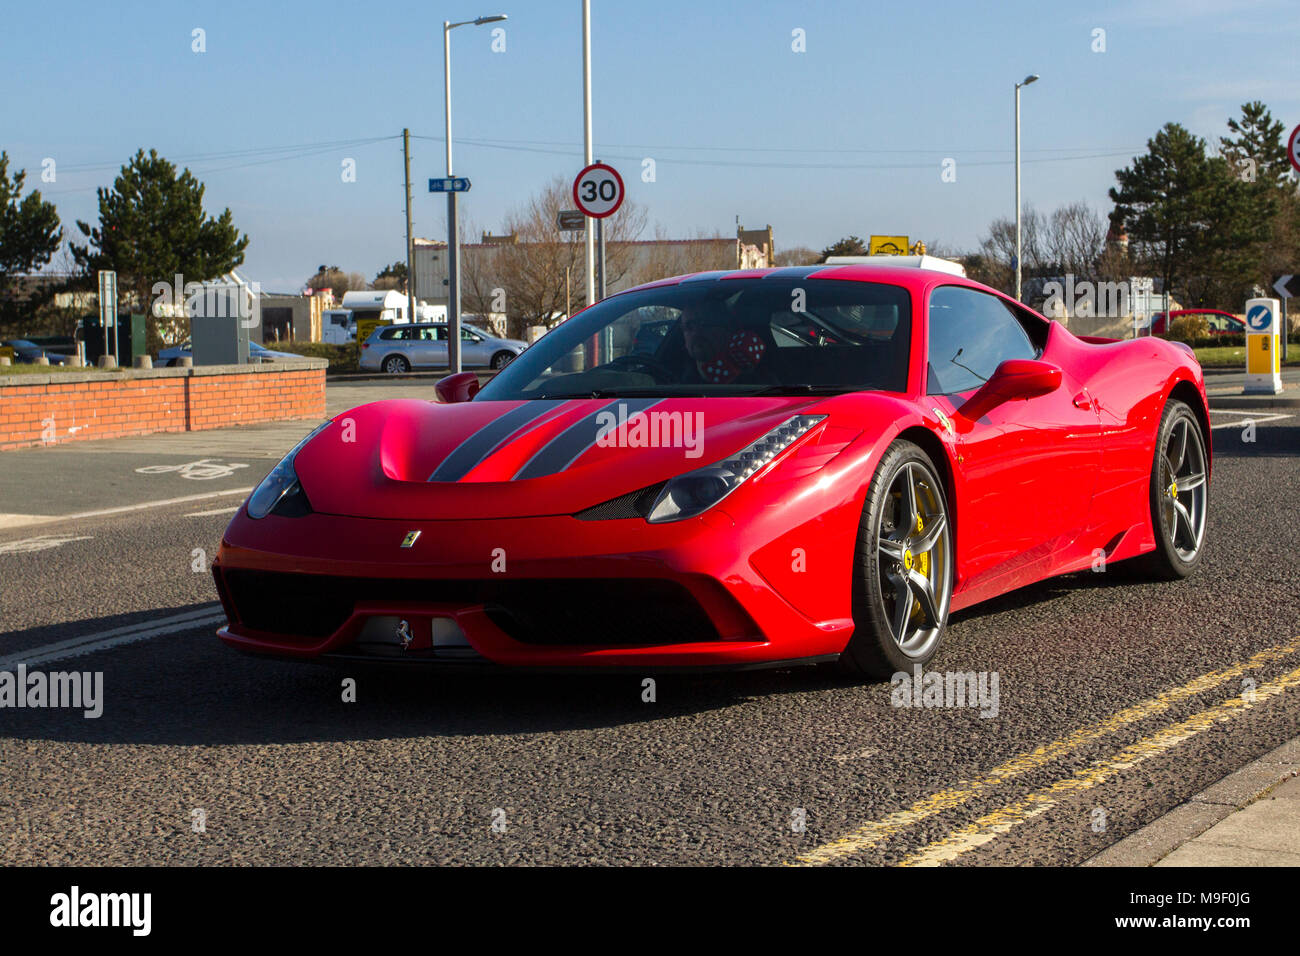 2015 red Ferrari 458 Speciale AB S-A 4497cc petrol coupe at the North-West Supercar event as cars and tourists arrive in the coastal resort of Southport. SuperCars are bumper to bumper on the seafront esplanade as classic & sports car enthusiasts enjoy a motoring day out. Stock Photo